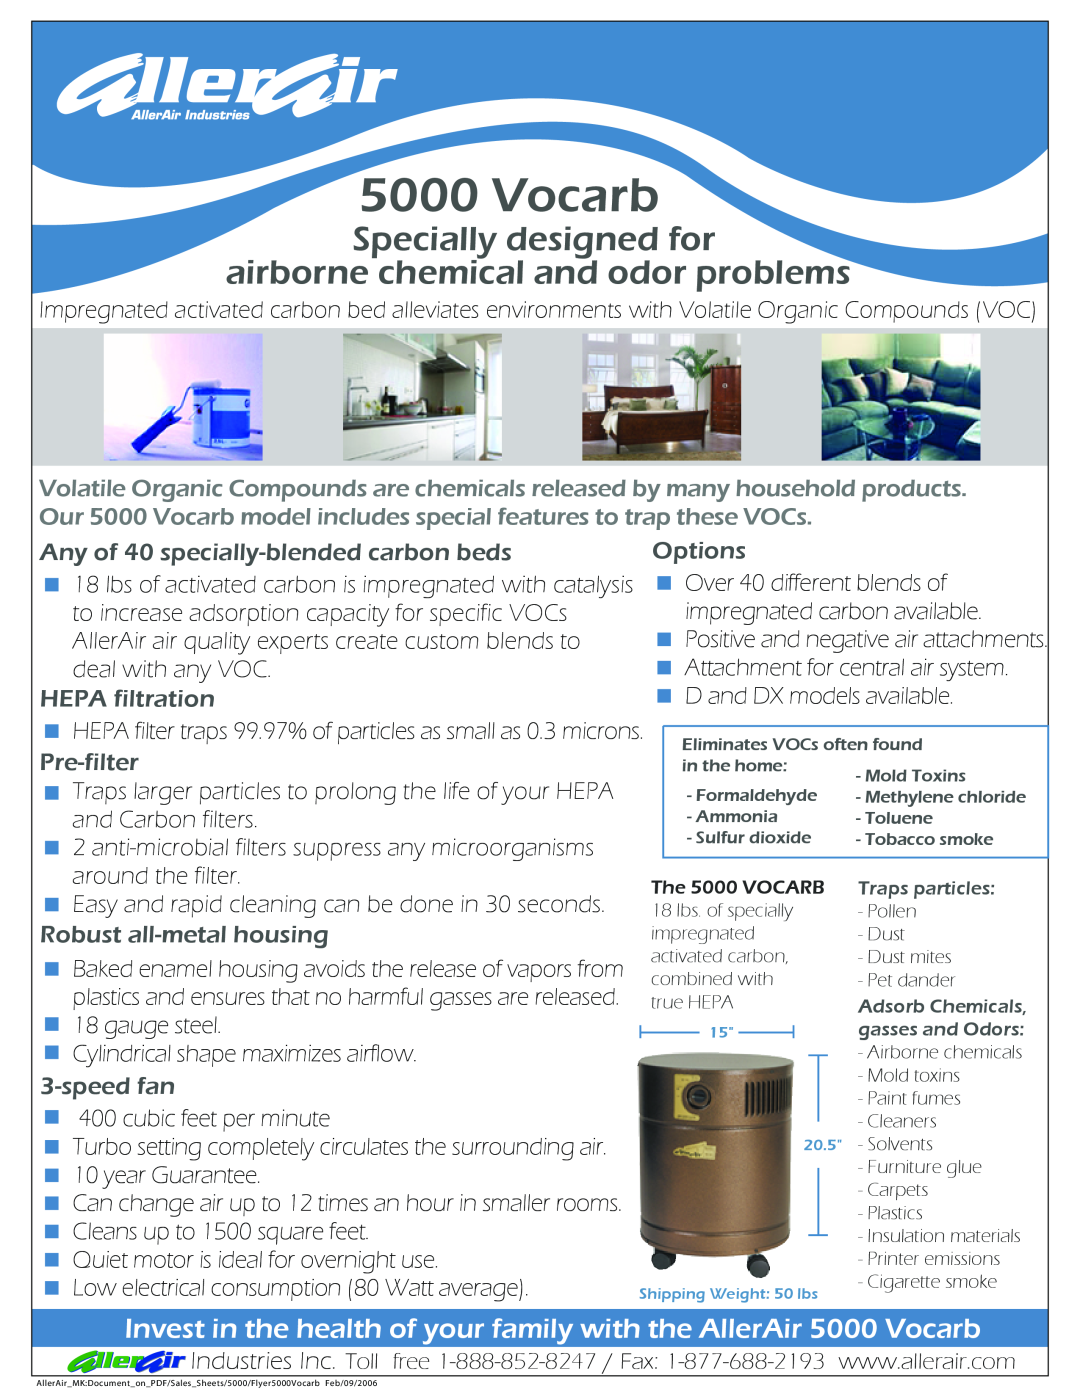 AllerAir 5000 Vocarb manual Any of 40 specially-blendedcarbon beds, Options, HEPA filtration, Pre-filter, speedfan 